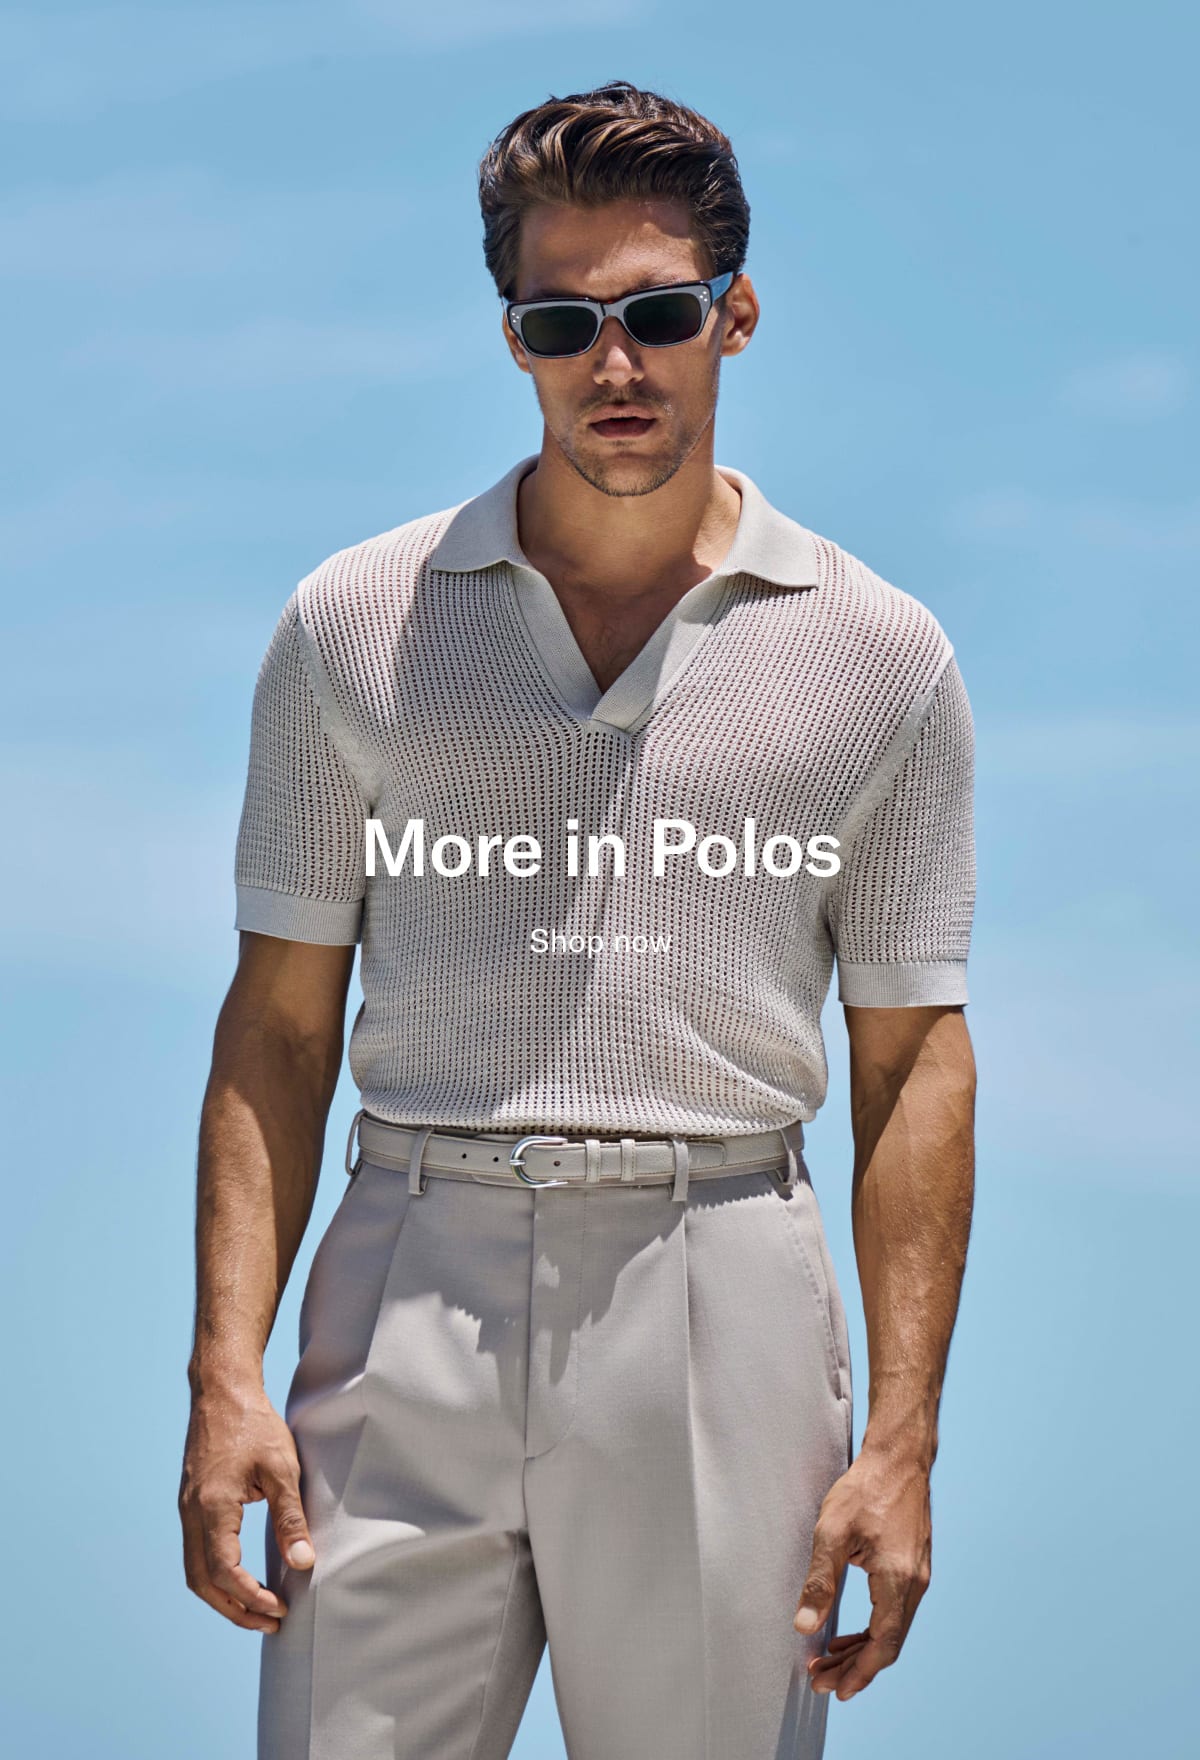 More in Polos | Shop now